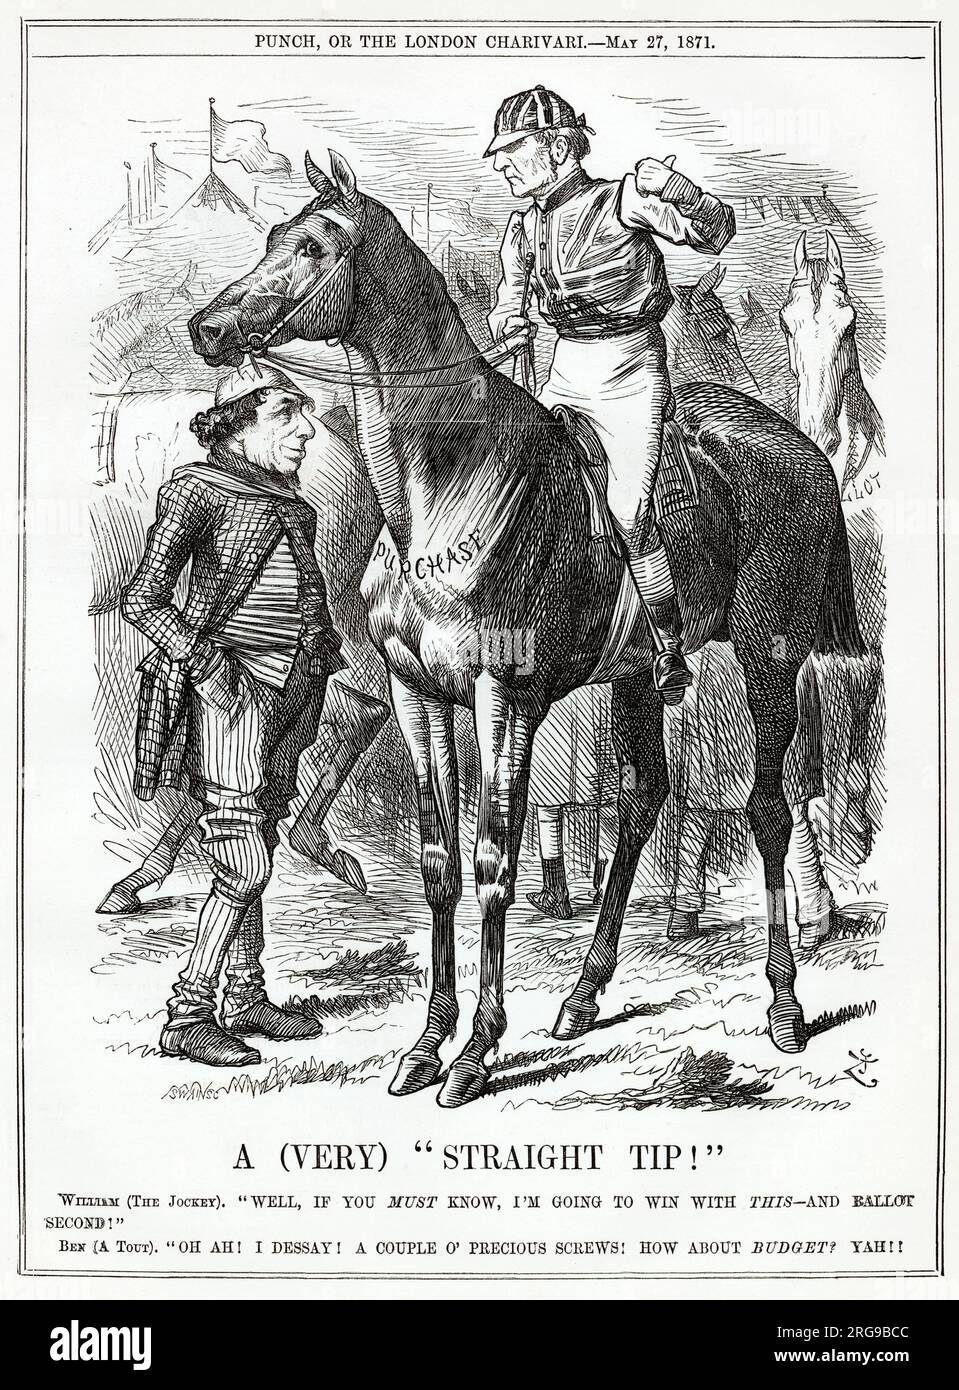 Cartoon, A (Very) Straight Tip!  In a horseracing analogy, Gladstone as jockey (riding Purchase) tells his political rival Disraeli (a tout) that he will win on this horse, and Ballot (referring to the planned secret ballot for voting) will come second in the parliamentary session. Disraeli asks, How about Budget? in a sarcastic manner (Gladstone's Budget had been less successful, and twopence had been added to the Income Tax). Stock Photo